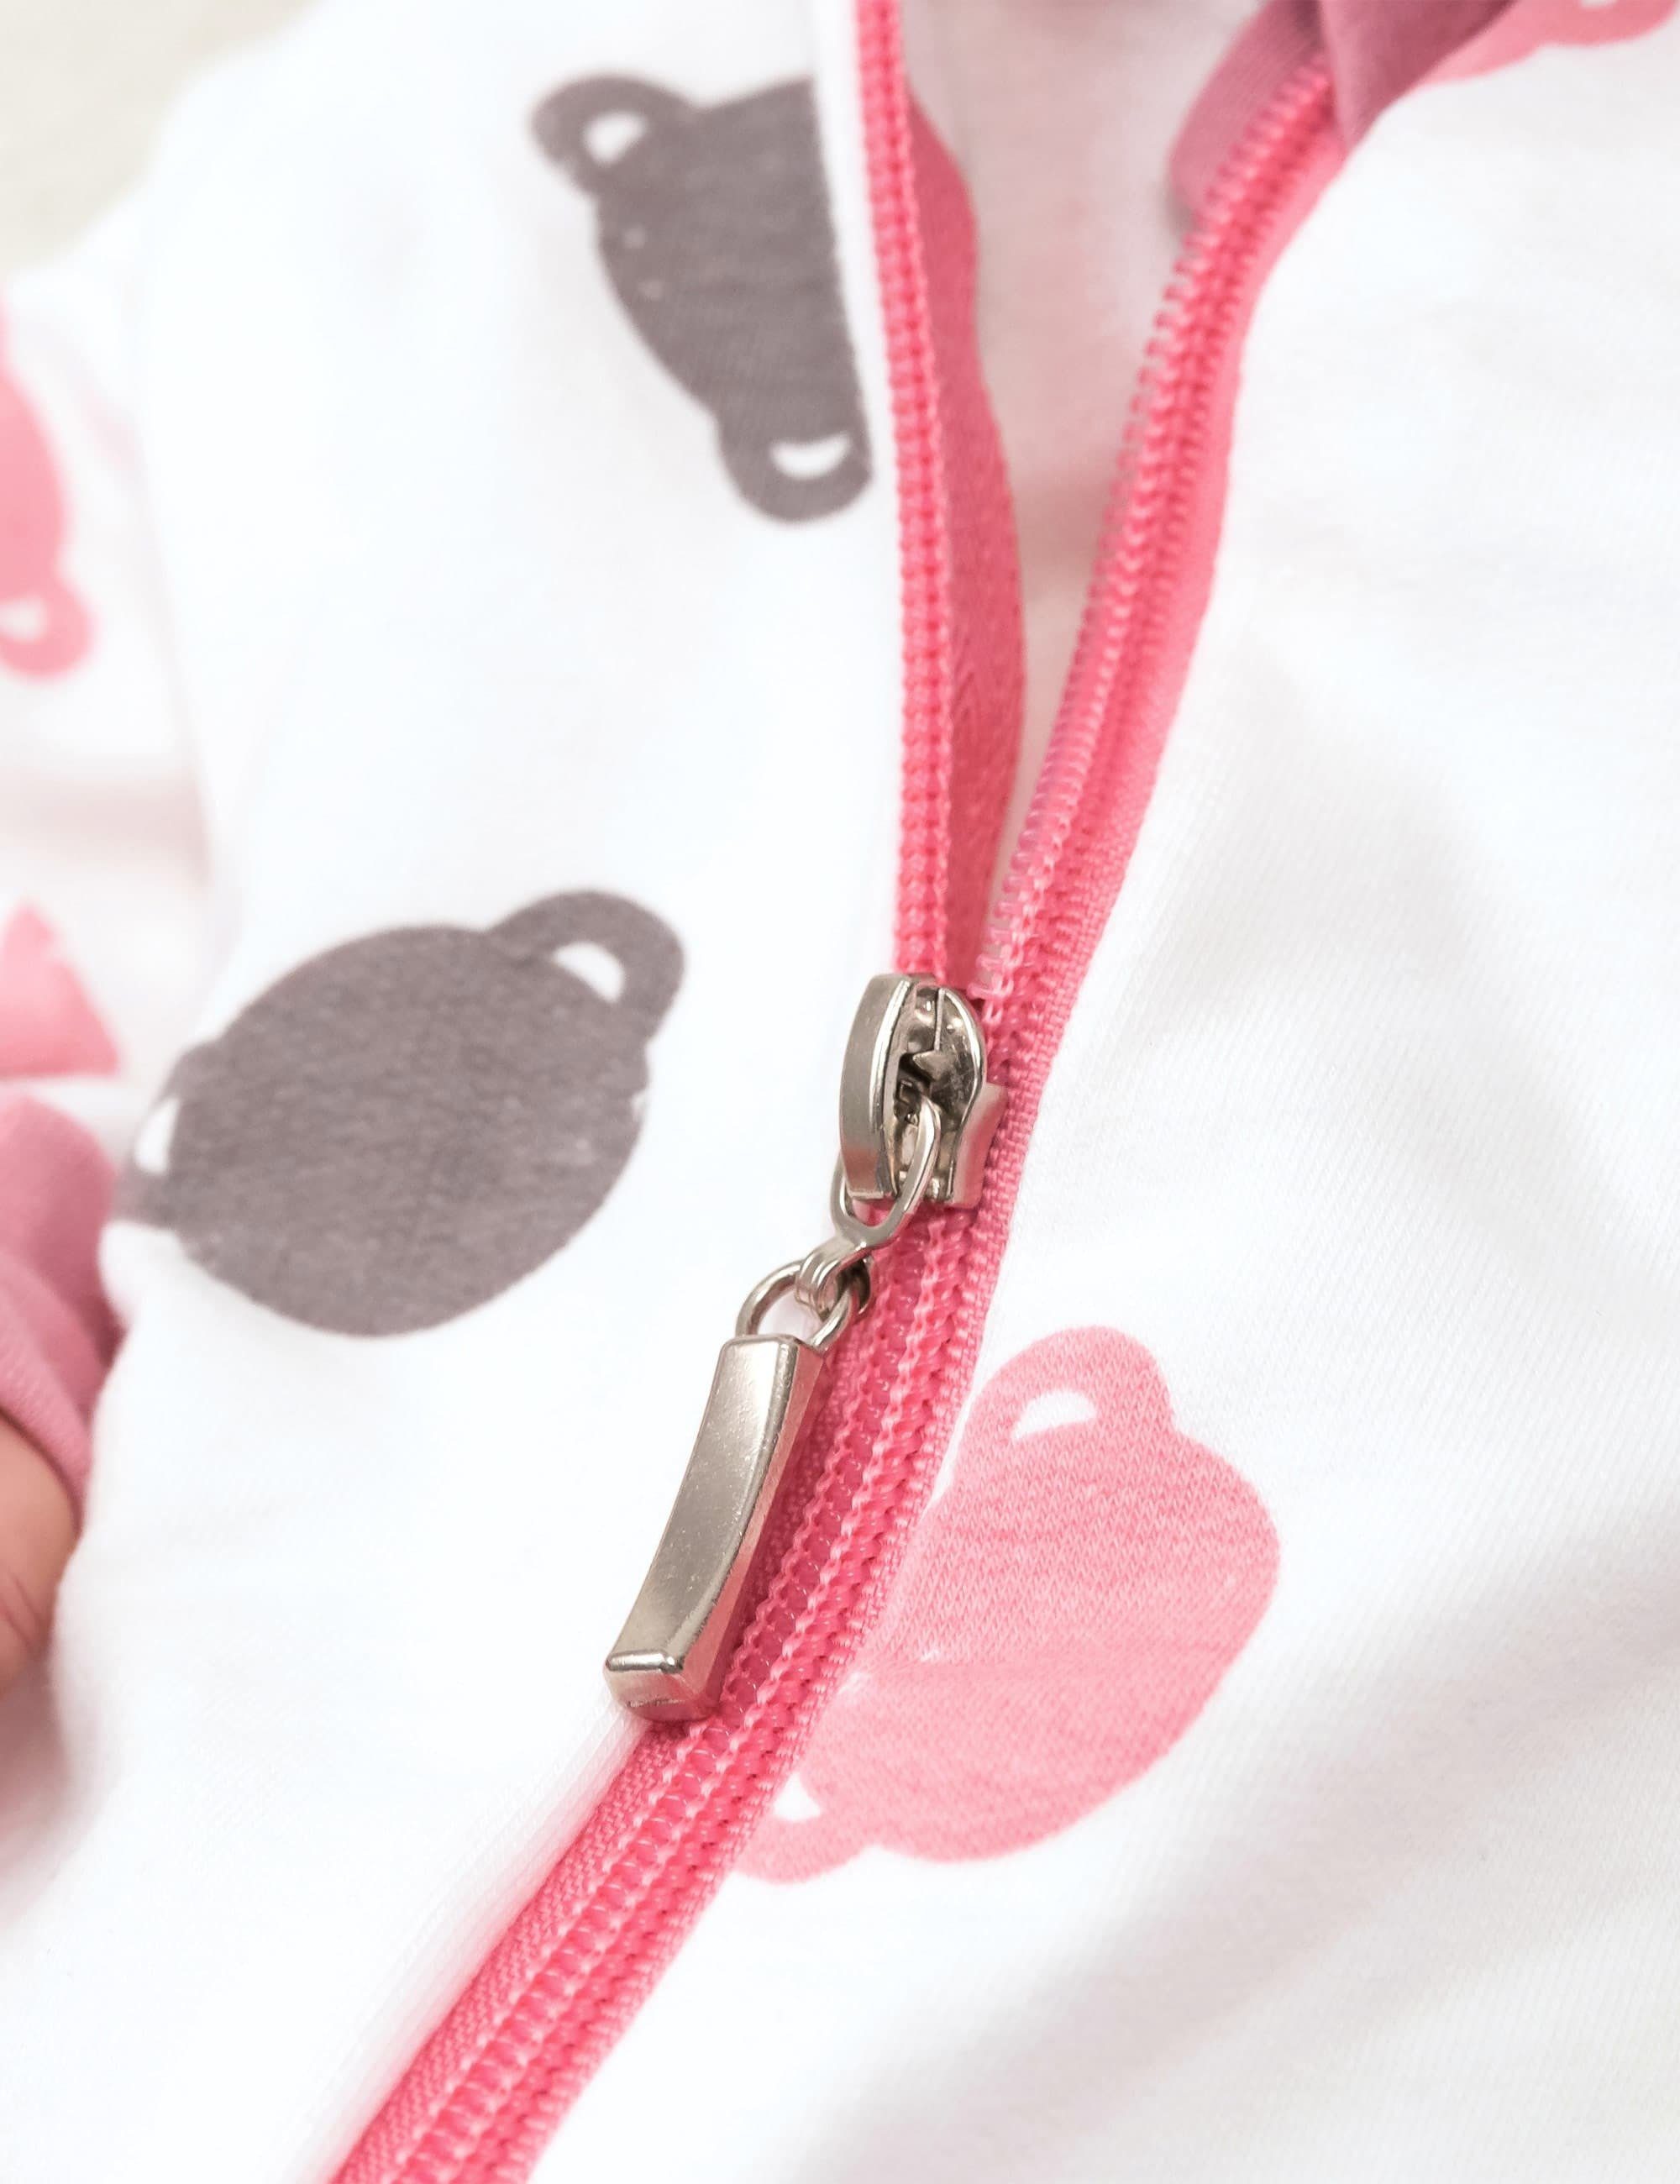 Koala rosa Baby Overall Sweets (1-tlg) Overall Strampler, weiß